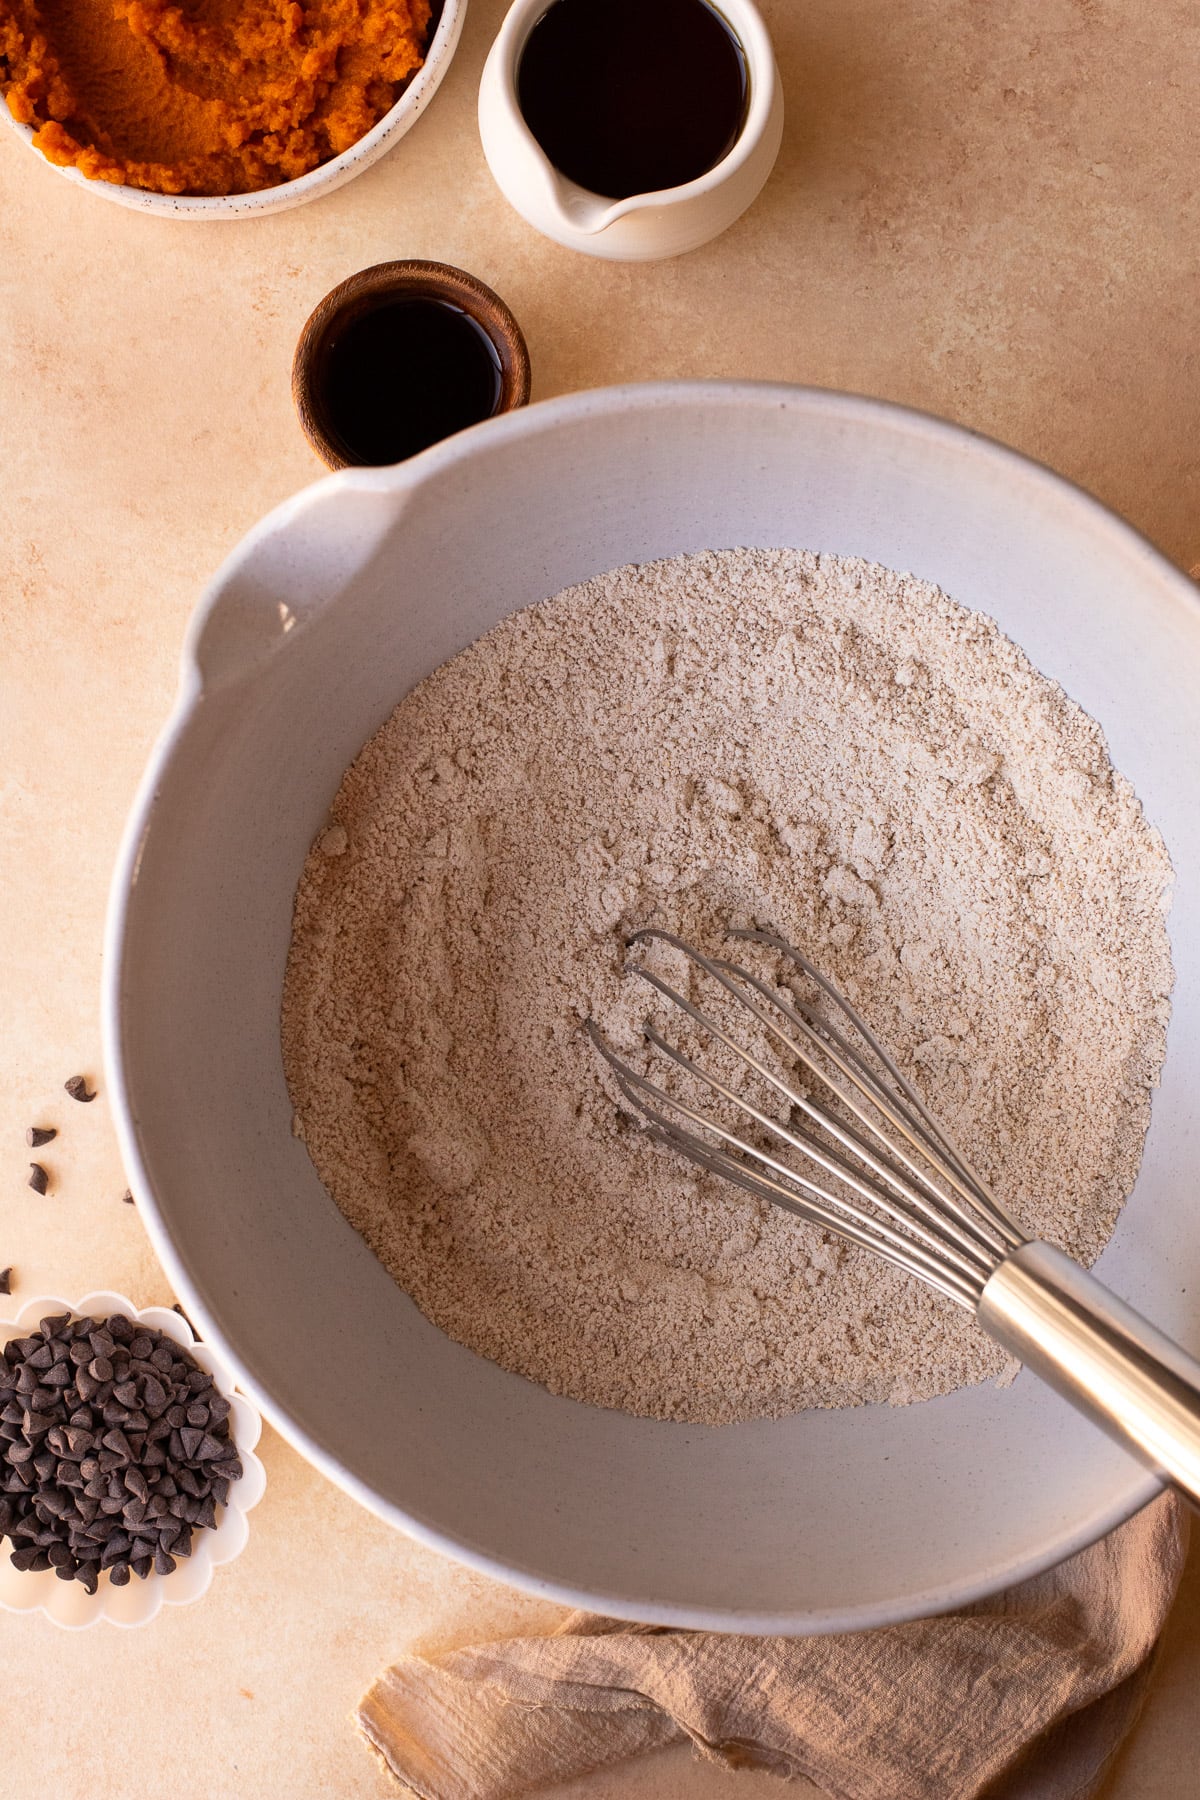 Dry ingredients being whisked together in a large bowl.